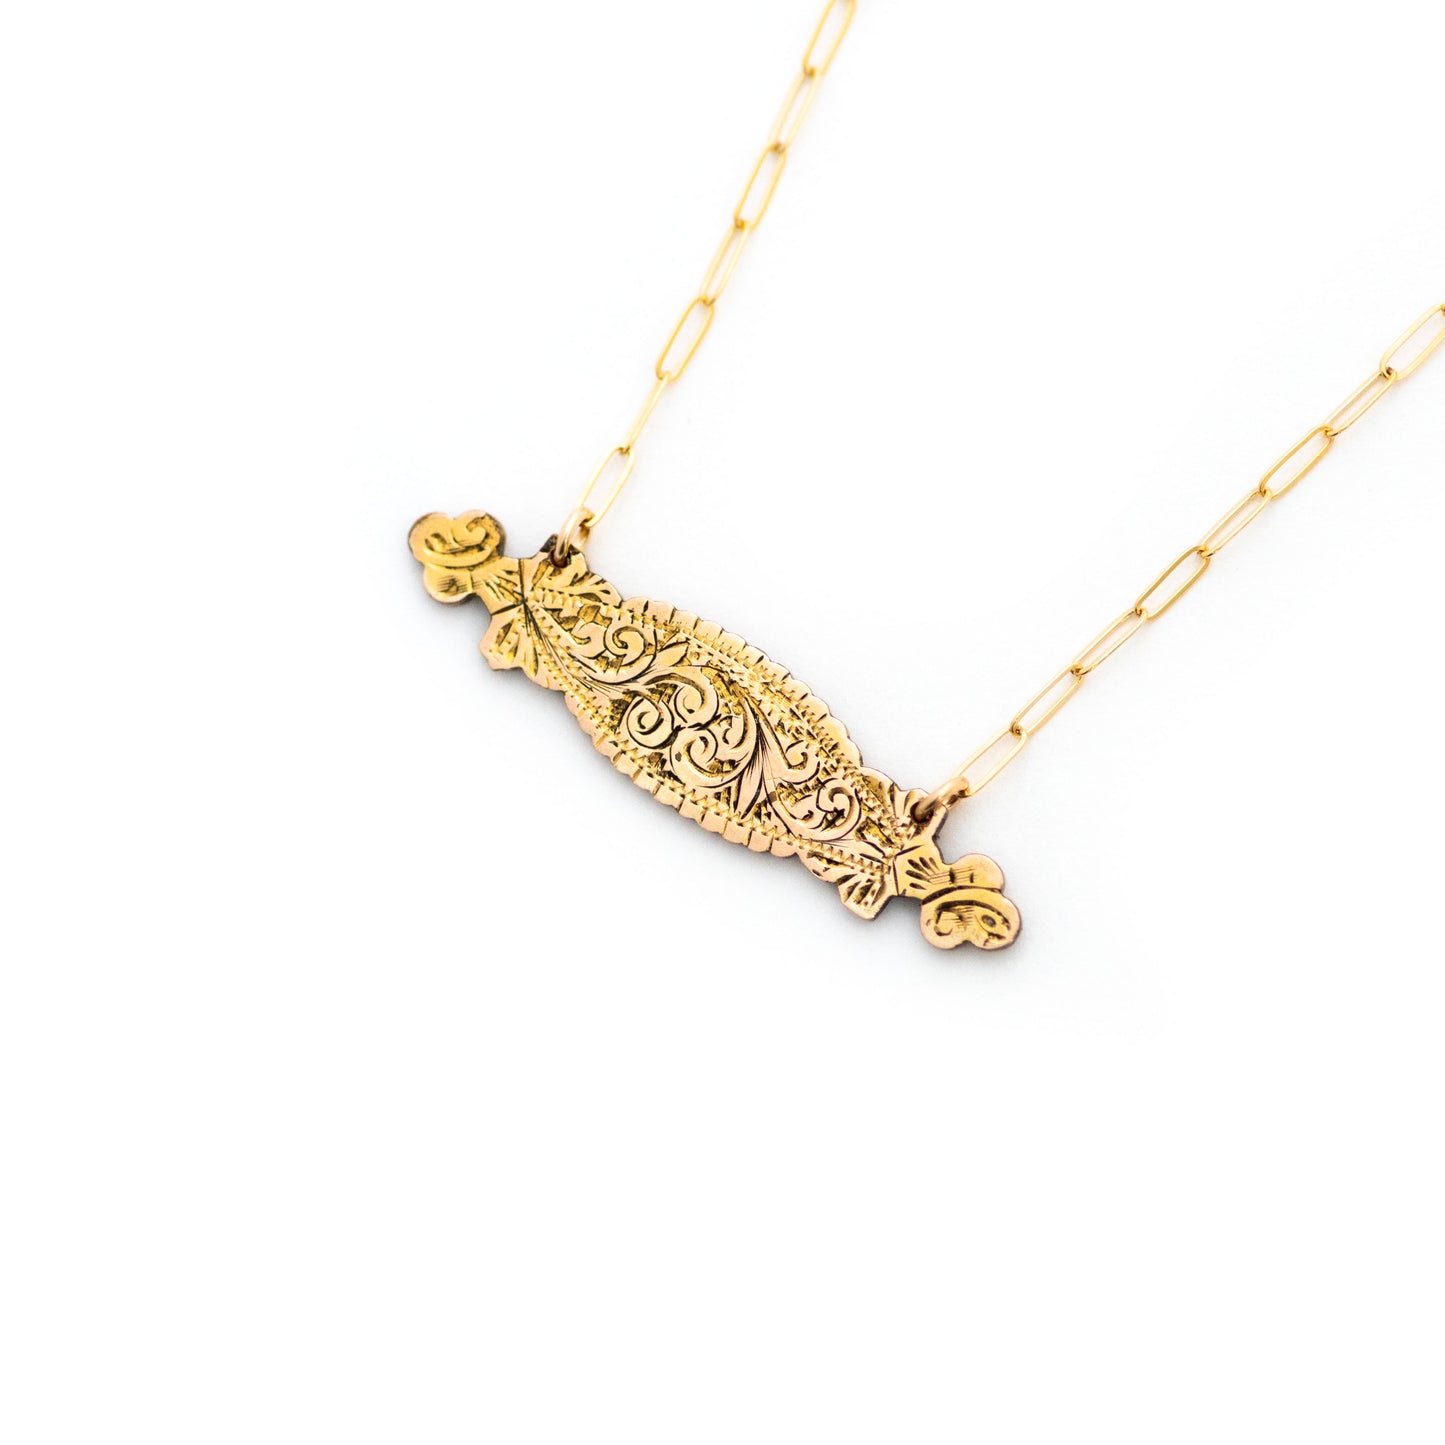 This one-of-a-kind conversion necklace is made up of:  Gold filled Victorian bar pin pendant from the late 1800s with hand engraved scrolling floral details. 